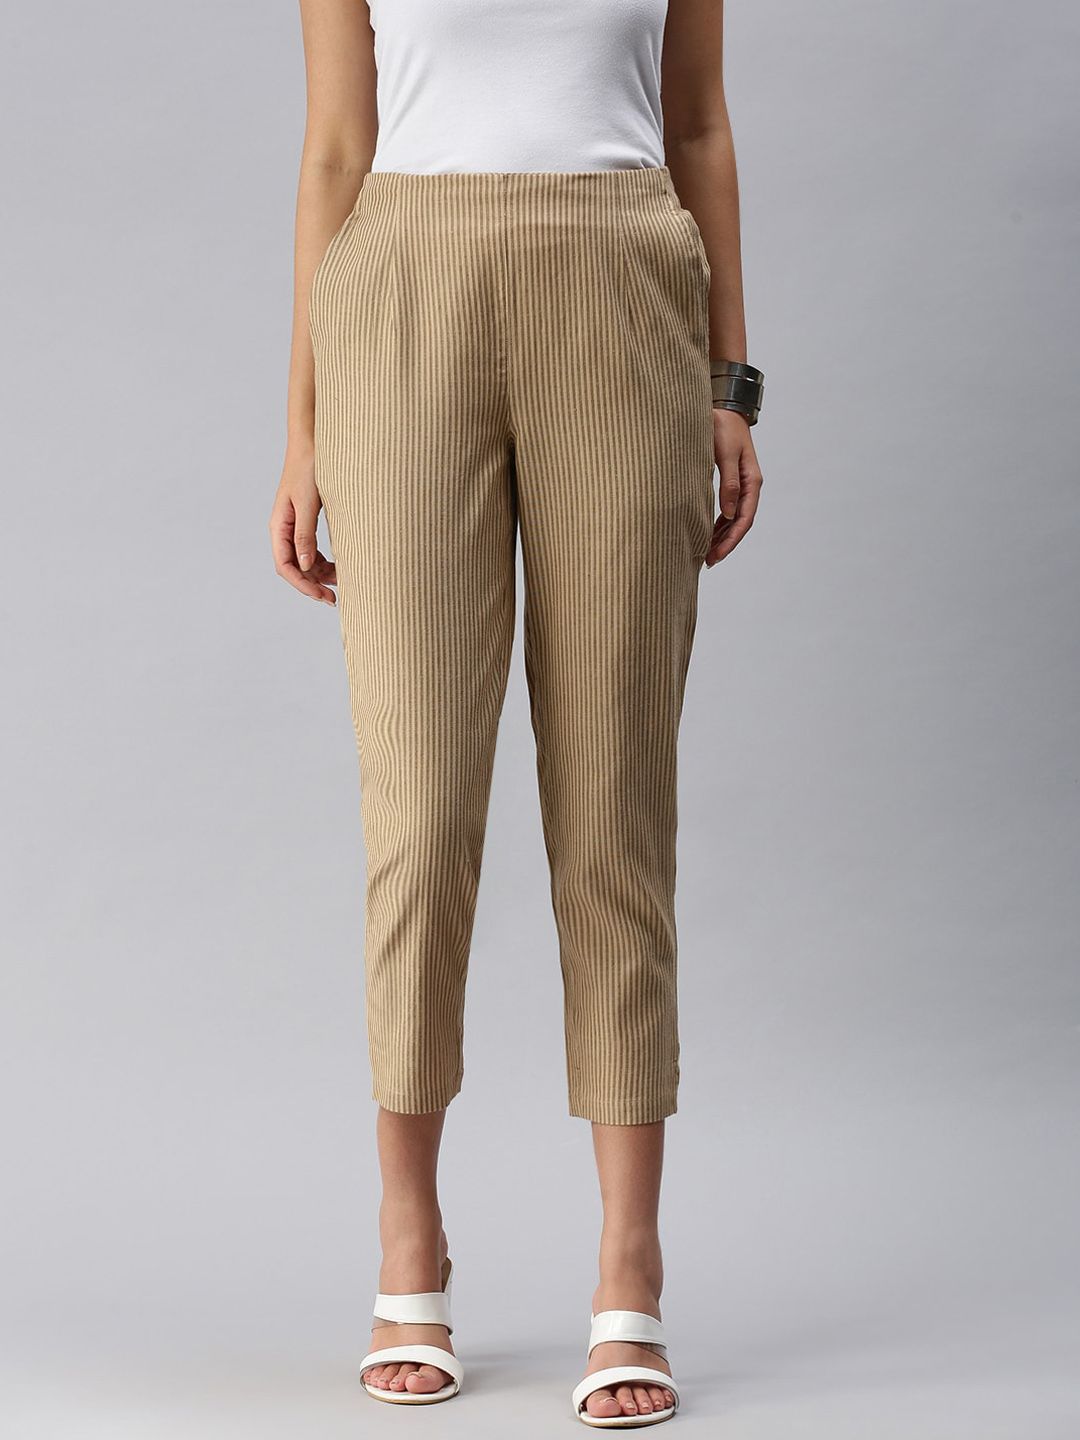 De Moza Women Beige Striped Tapered Fit Cotton Trousers Price in India